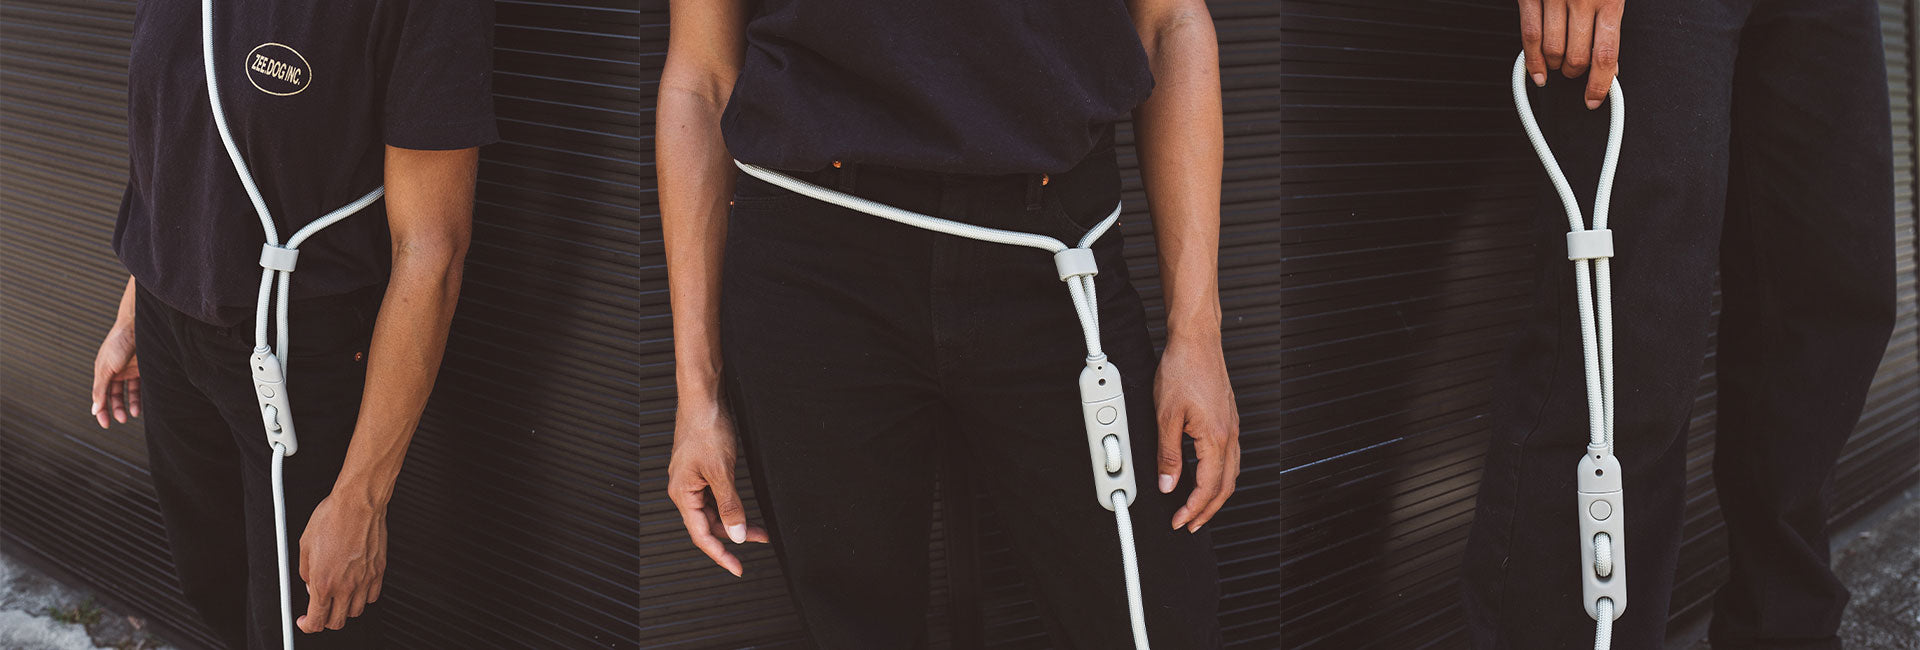 Space Grey | Hands-Free Leash